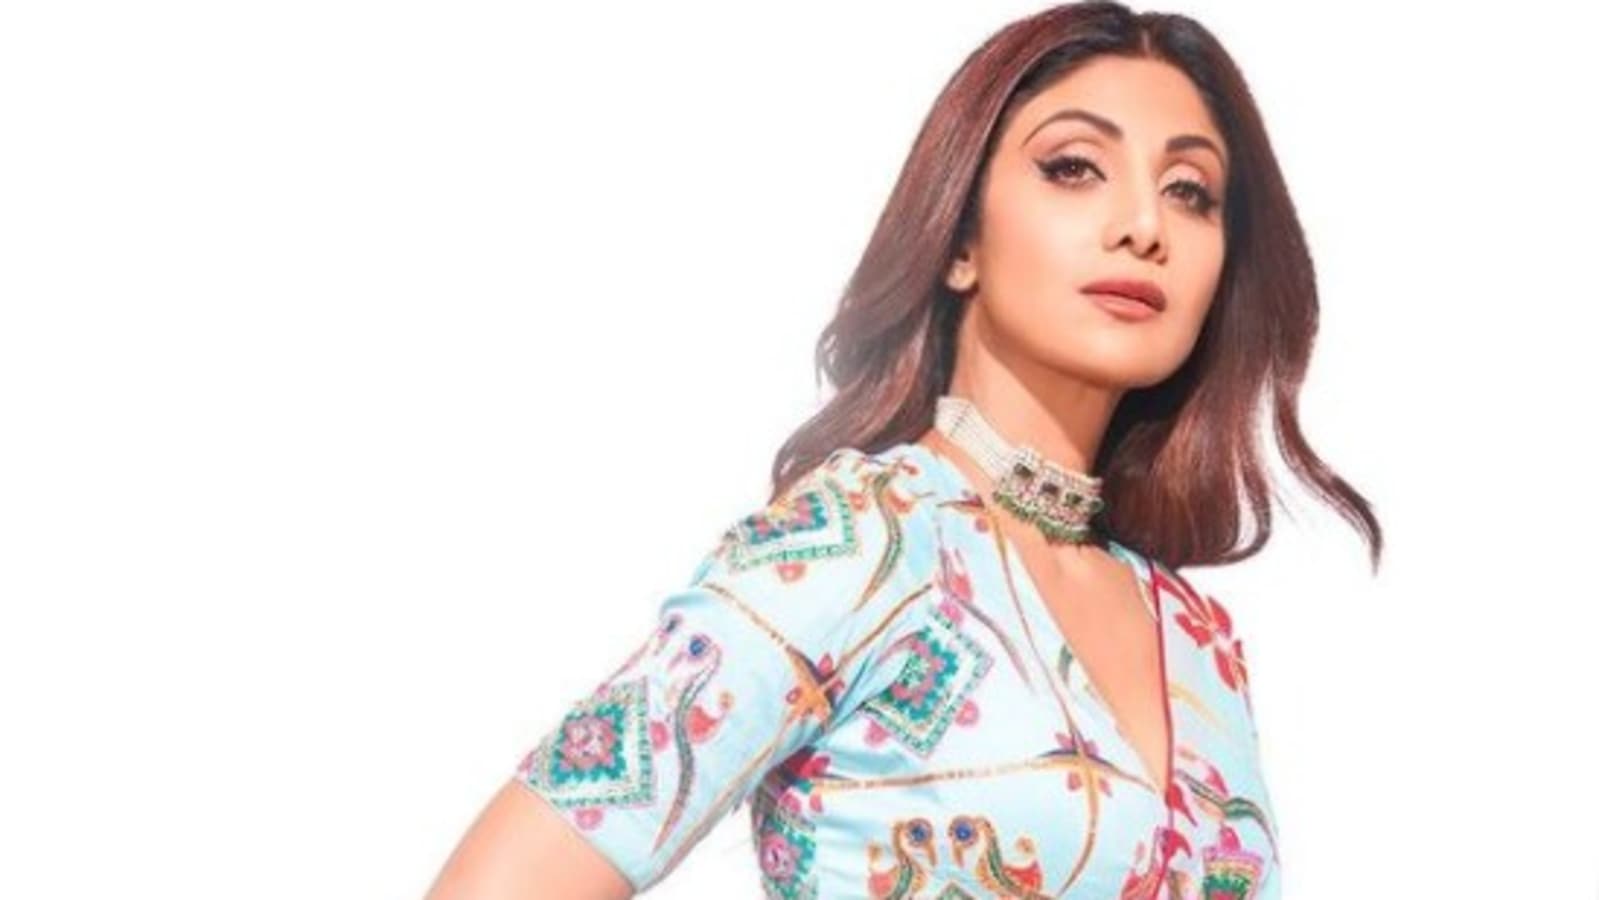 Shilpa Sheti Lagi Xxx Vidiyo - Shilpa Shetty shares pics from first photoshoot after Raj Kundra's arrest,  is 'determined to rise'. See here | Bollywood - Hindustan Times